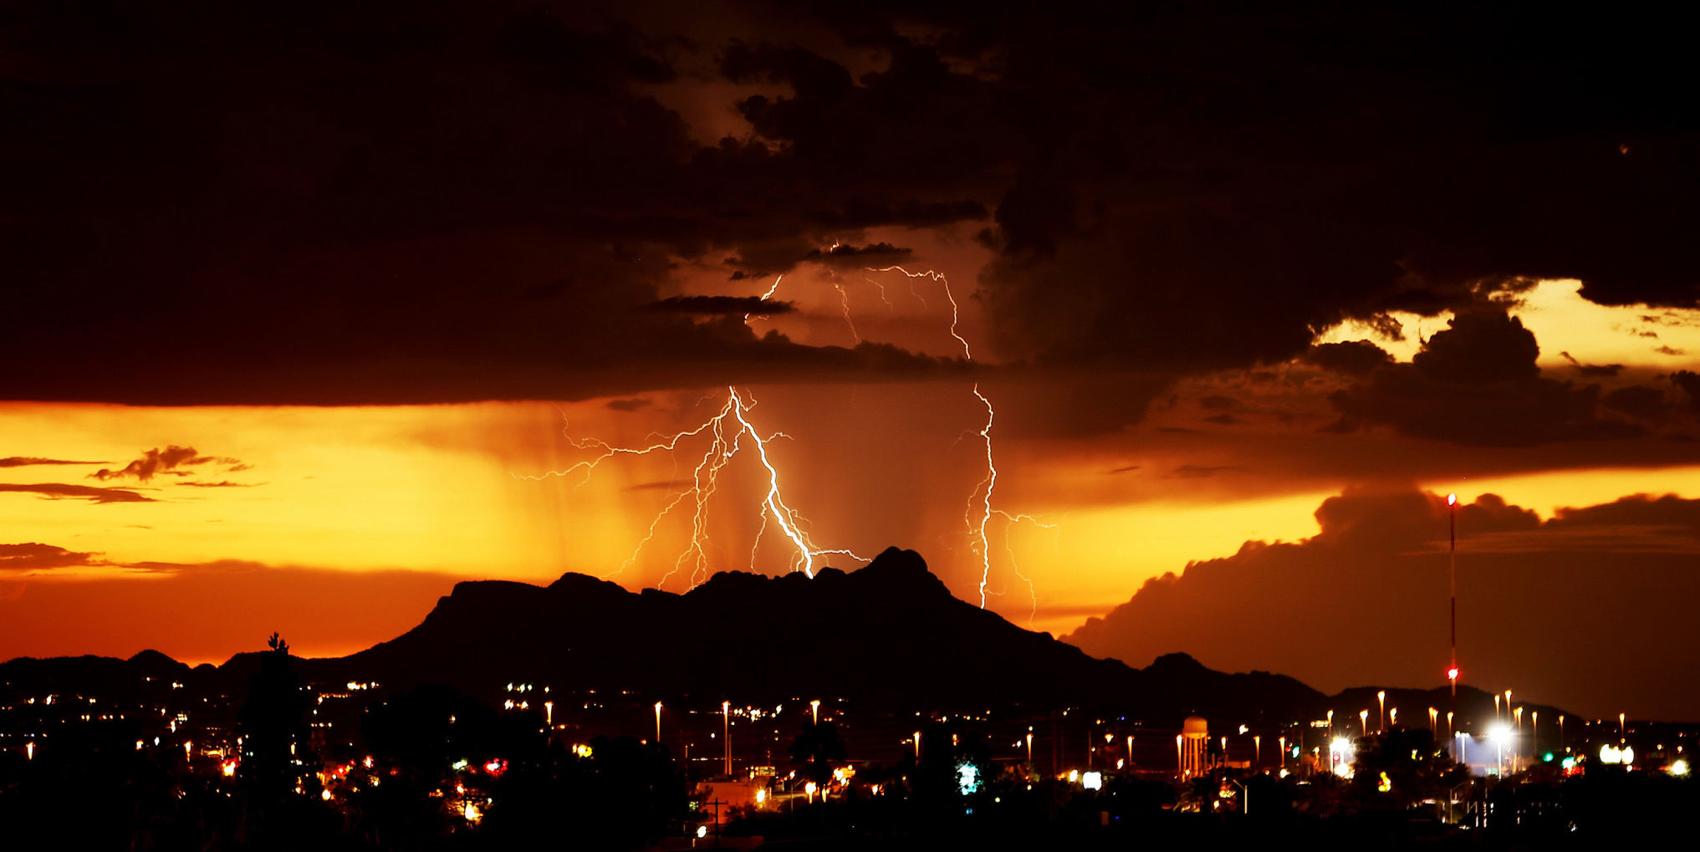 44 photos of intense Tucson monsoon storms Tucson Summer Guide